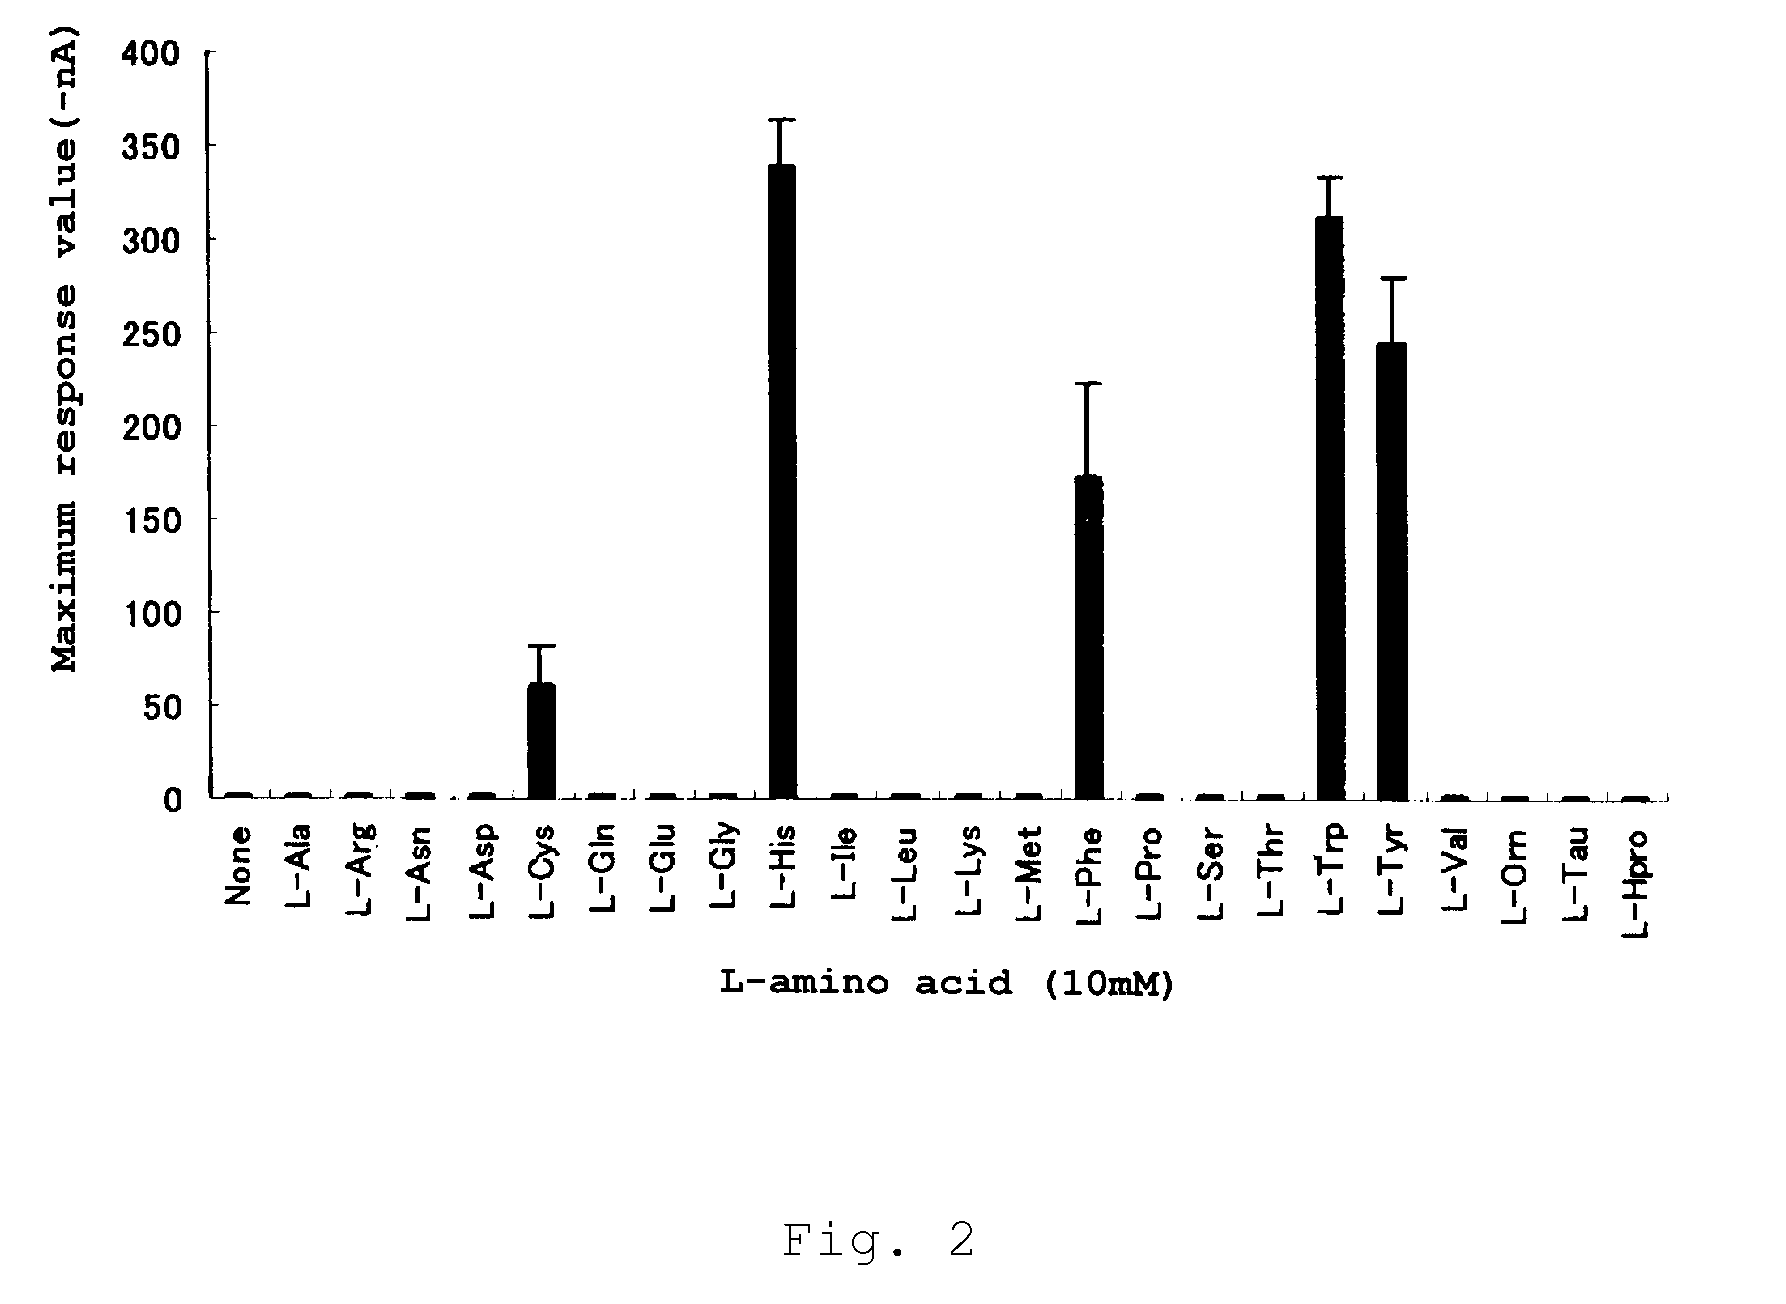 Kokumi-imparting agent, method of using, and compositions containing same